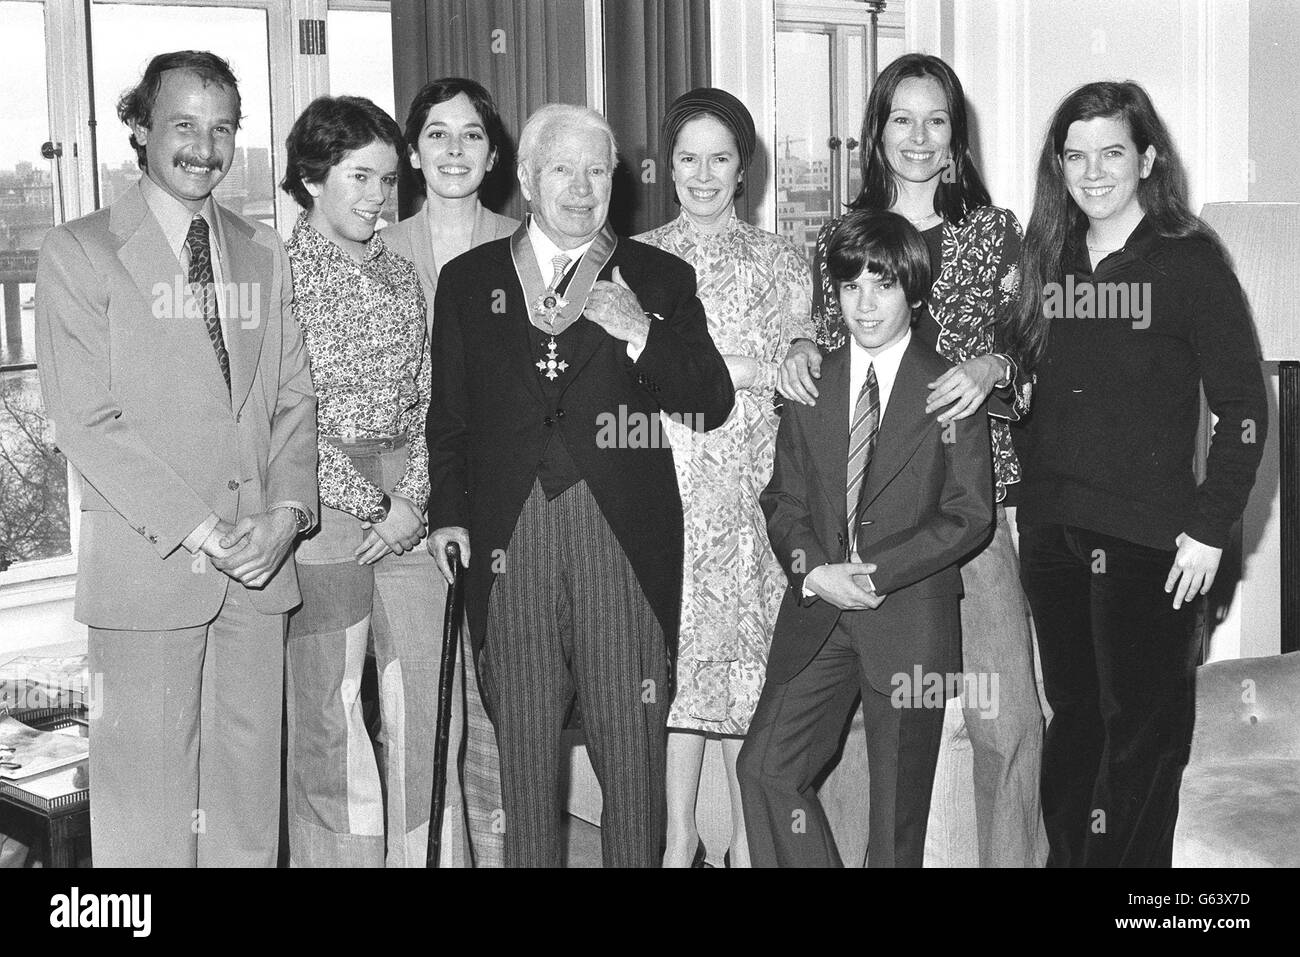 Sir Charlie Chaplin is back in his suite at the Savoy Hotel, after being knighted at the Palace, with his family. Behind him (l-r) His son-in-law Nick Sistovaris, daughters Annie and Josephine, wife Oona, son Christopher and daughters Geraldine and Jane. LUKEOTDI: Charlie Chaplin, the legend of silent film, became Sir Charles after a ceremony at Buckingham Palace. Chaplin starred in pictures such as The Kid and The Great Dictator, and was knighted in the New Year's Honours List. Stock Photo